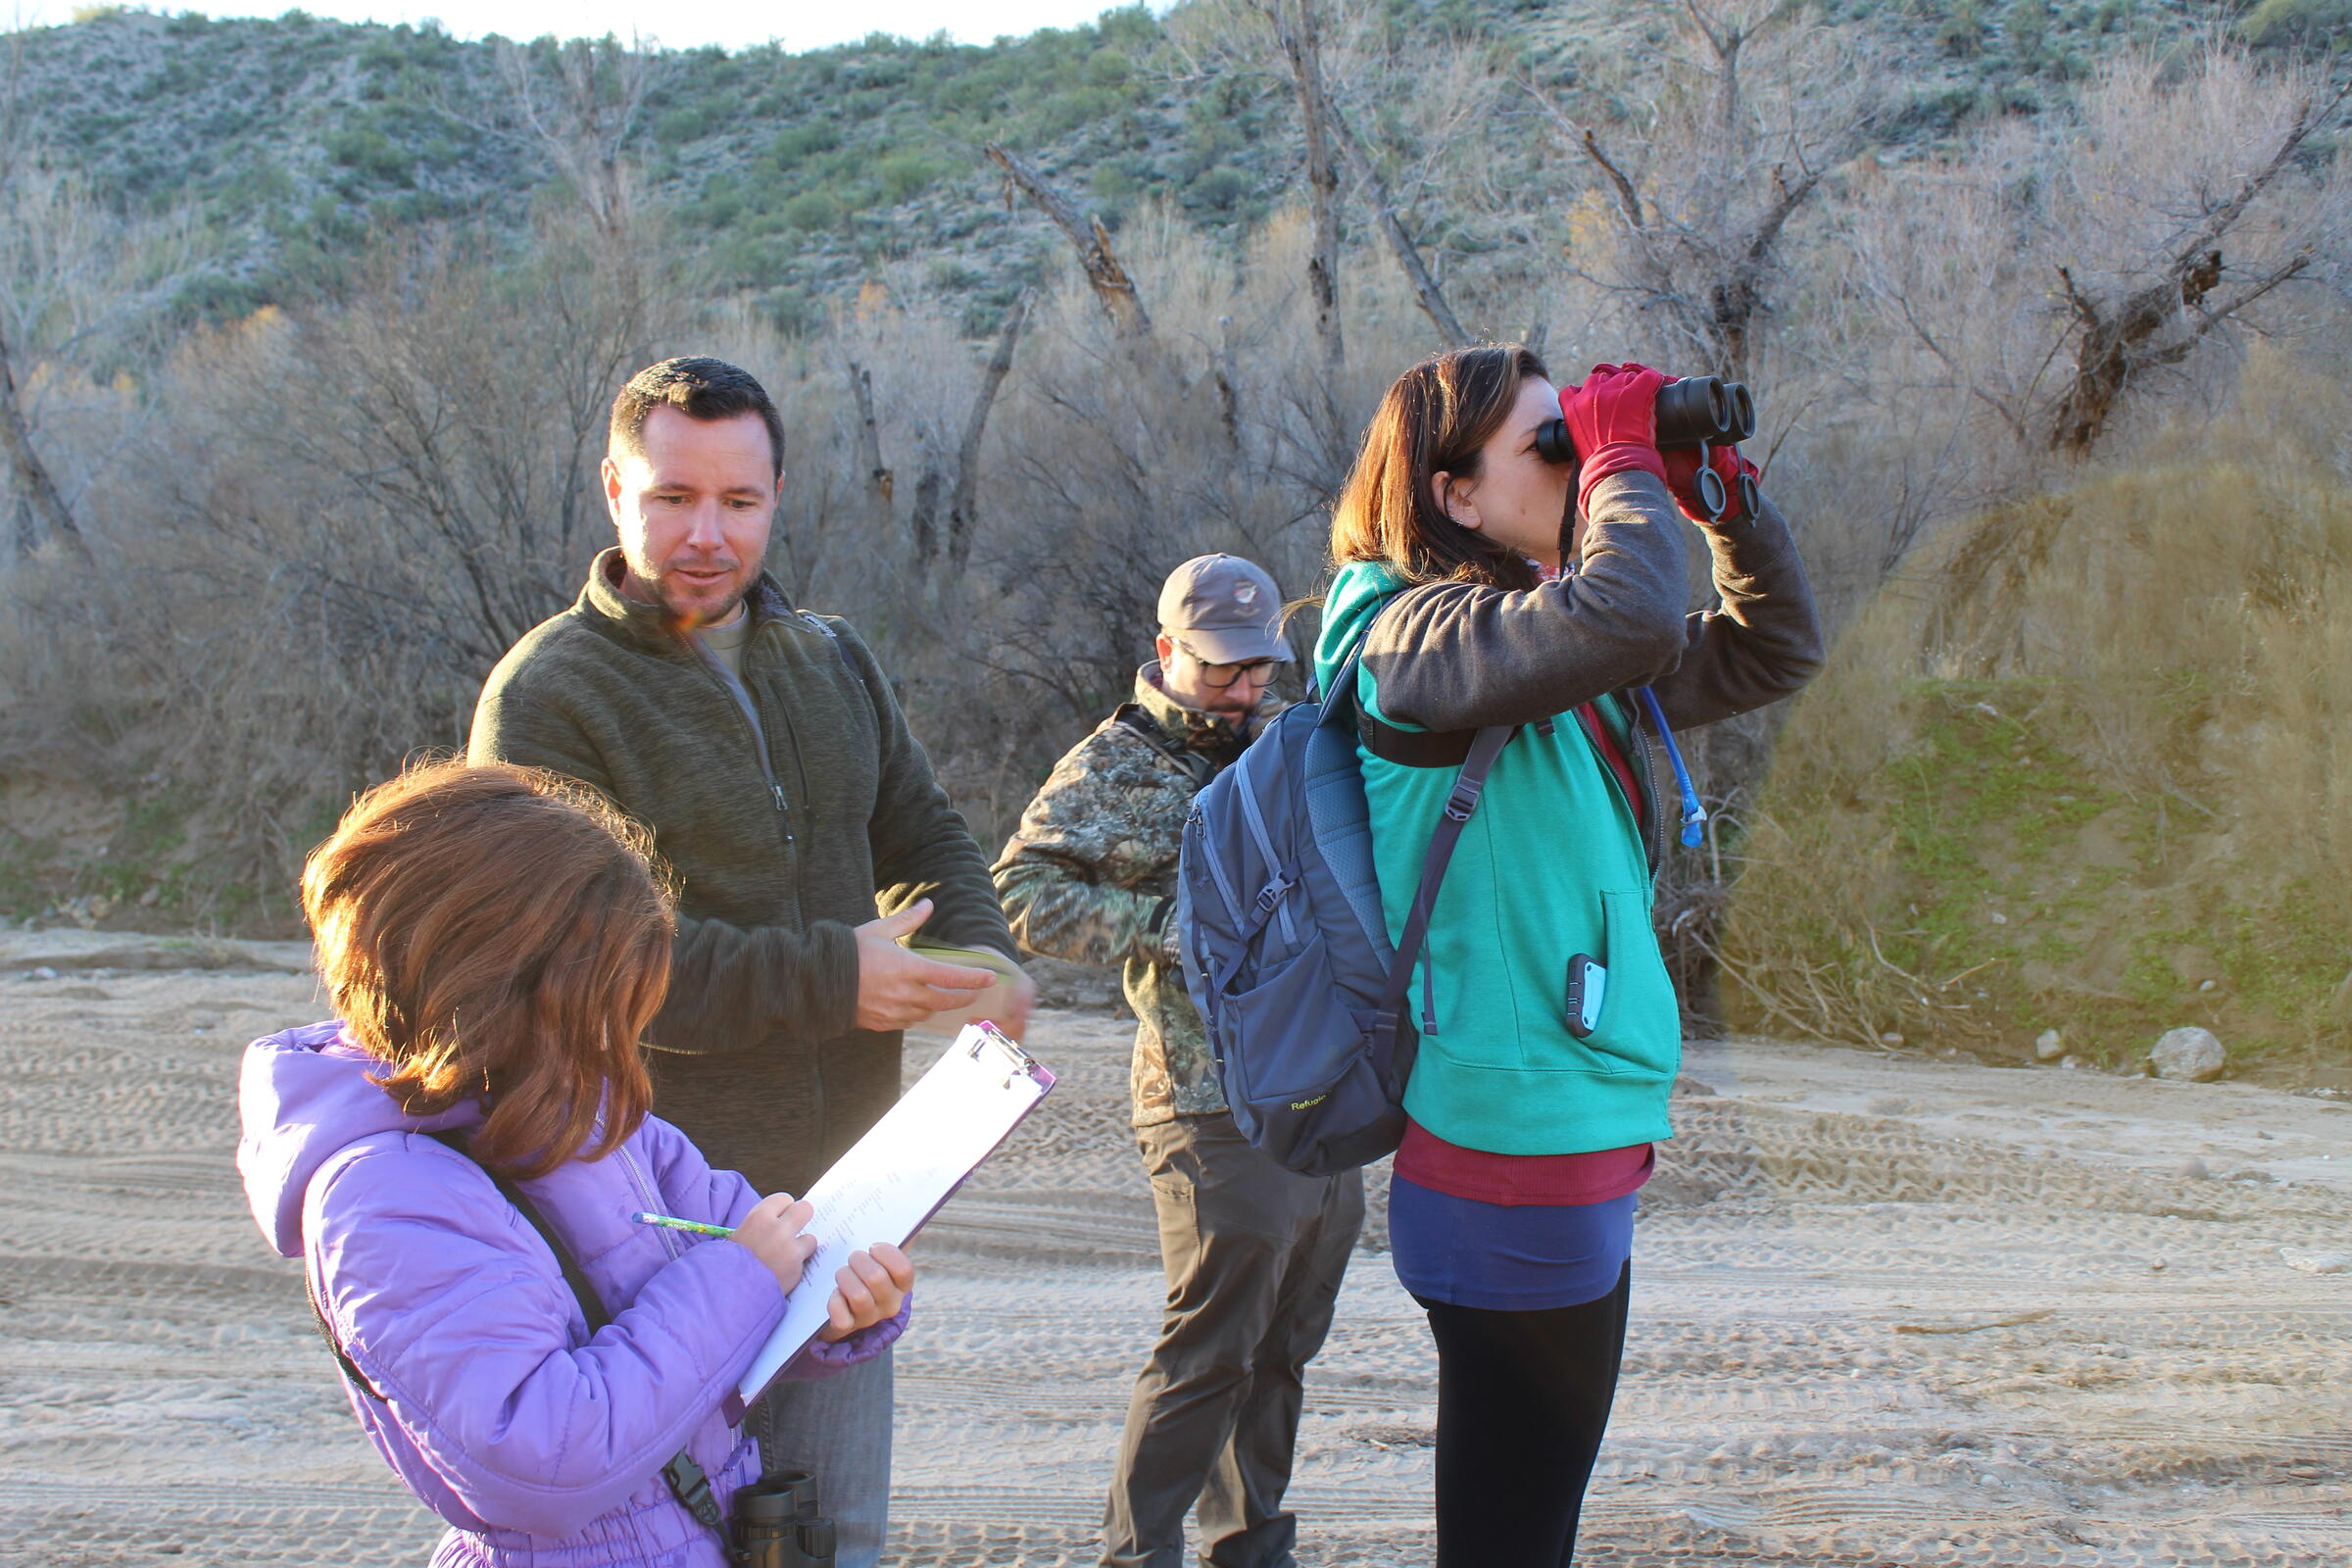 In a dry riverbed, a woman looks at a bird with binoculars while a little girl records the sighting on a piece of paper. Two men in the background get out their binoculars and field guide. It is sunny but also looks cold.